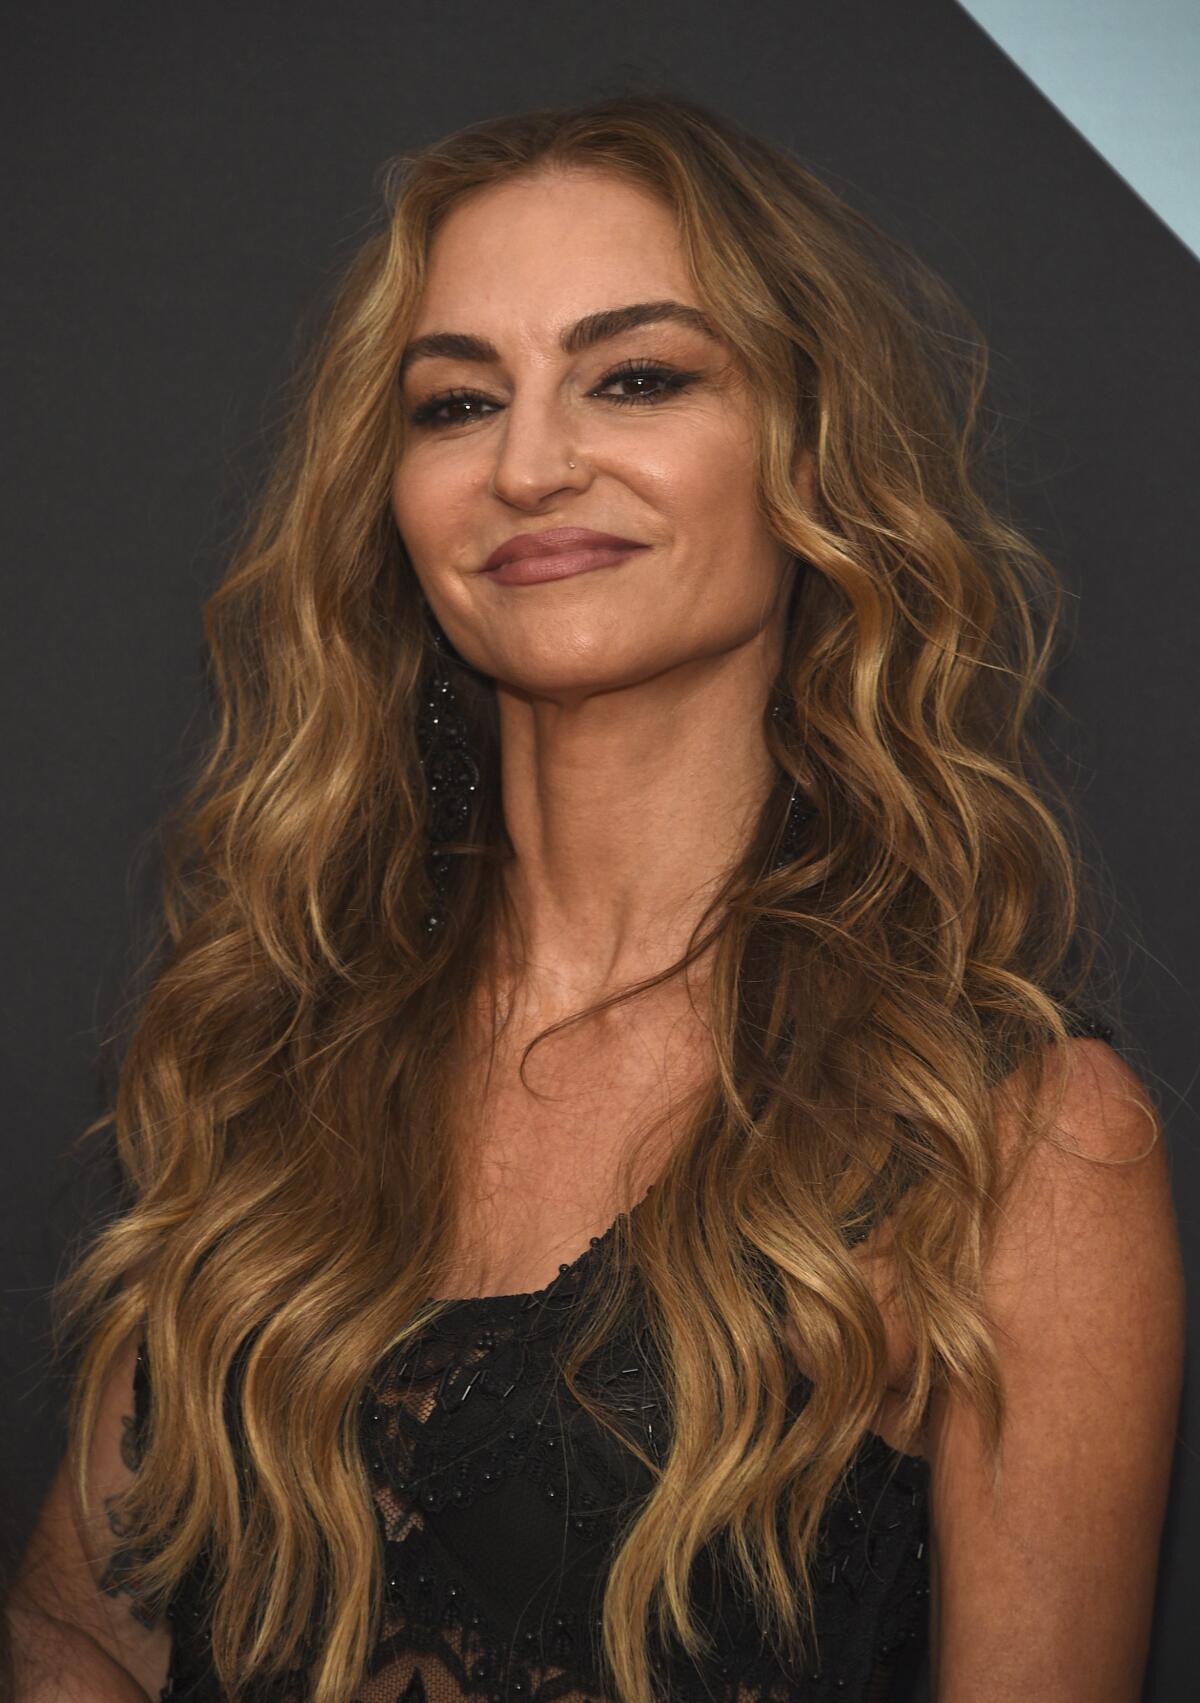 Drea de Matteo shows off a crooked smile and long hair while wearing a sleeveless black dress